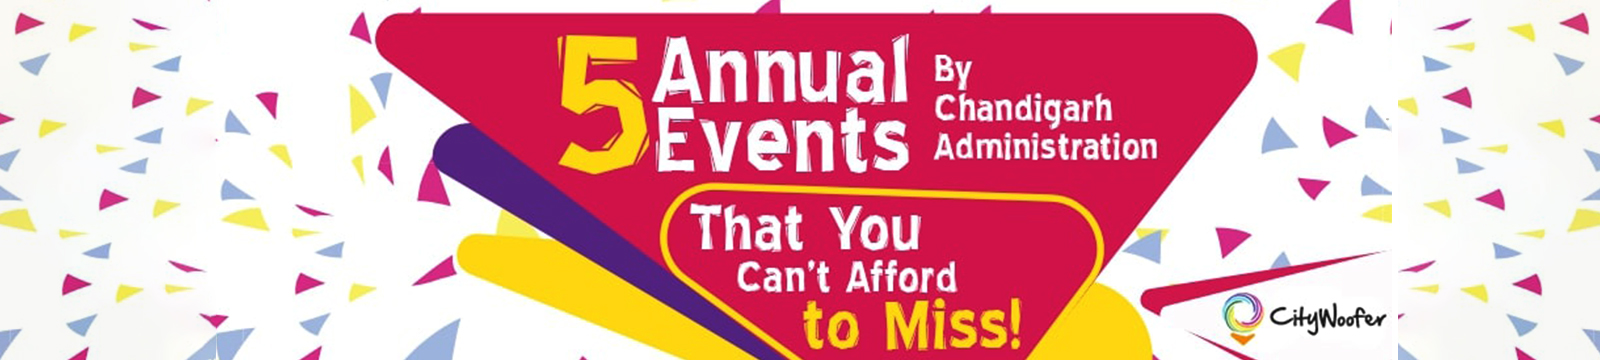 5 Annual Events by Chandigarh Administration, That You Can’t Afford to Miss!